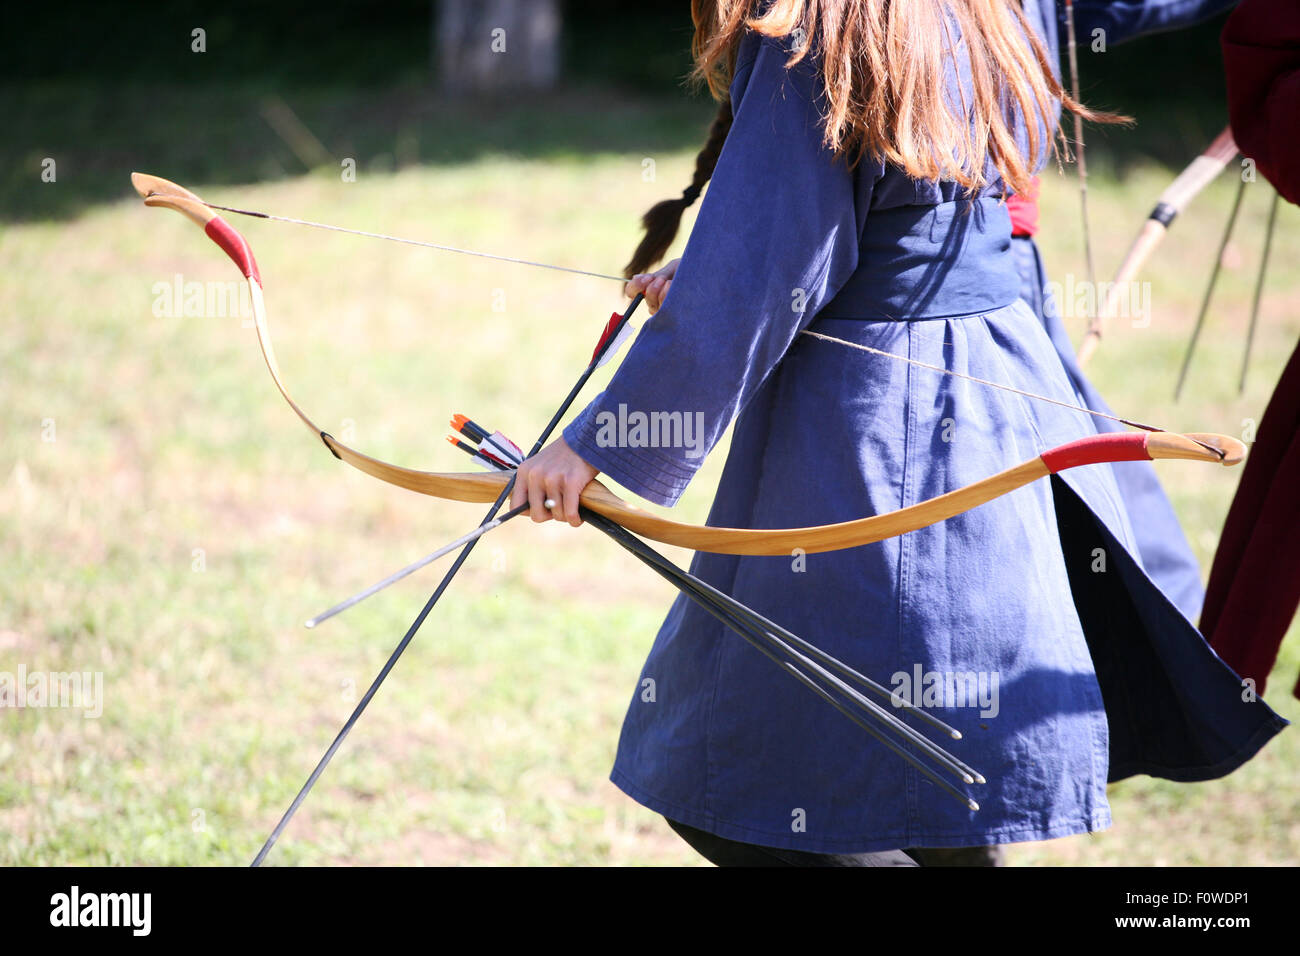 Female archers on a medieval fighting event Stock Photo